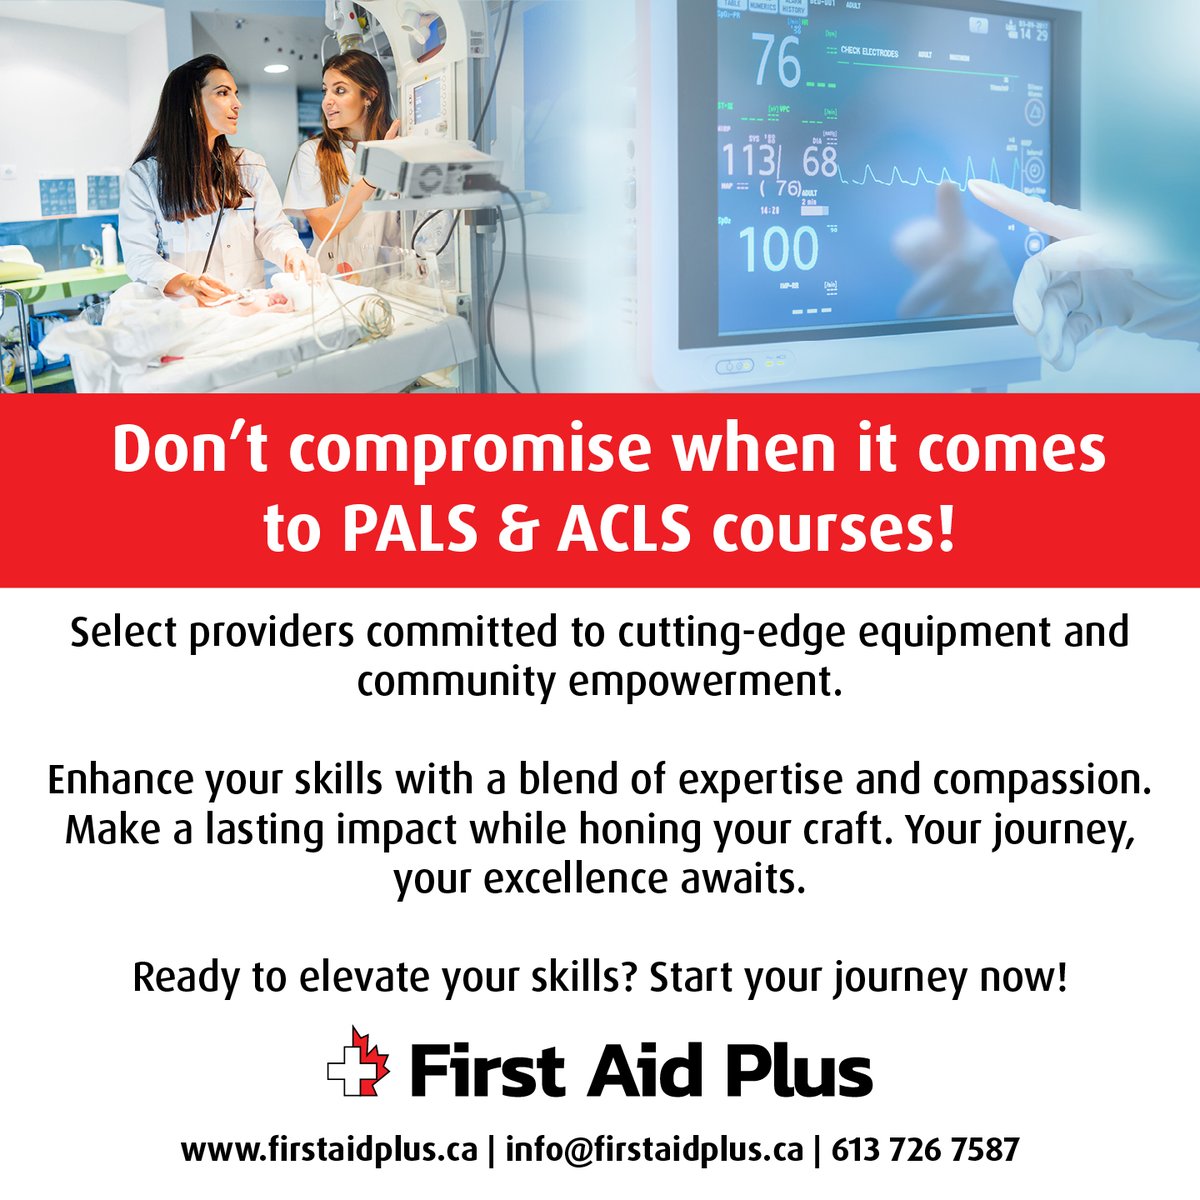 Choose cutting-edge providers for your training. Enhance skills with expertise and compassion. Your excellence awaits. #MedicalTraining #ProfessionalDevelopment #PALS #ACLS #OttawaMedical #HealthcareProfessionals #ContinuousLearning #OttawaLife #OttawaEvents